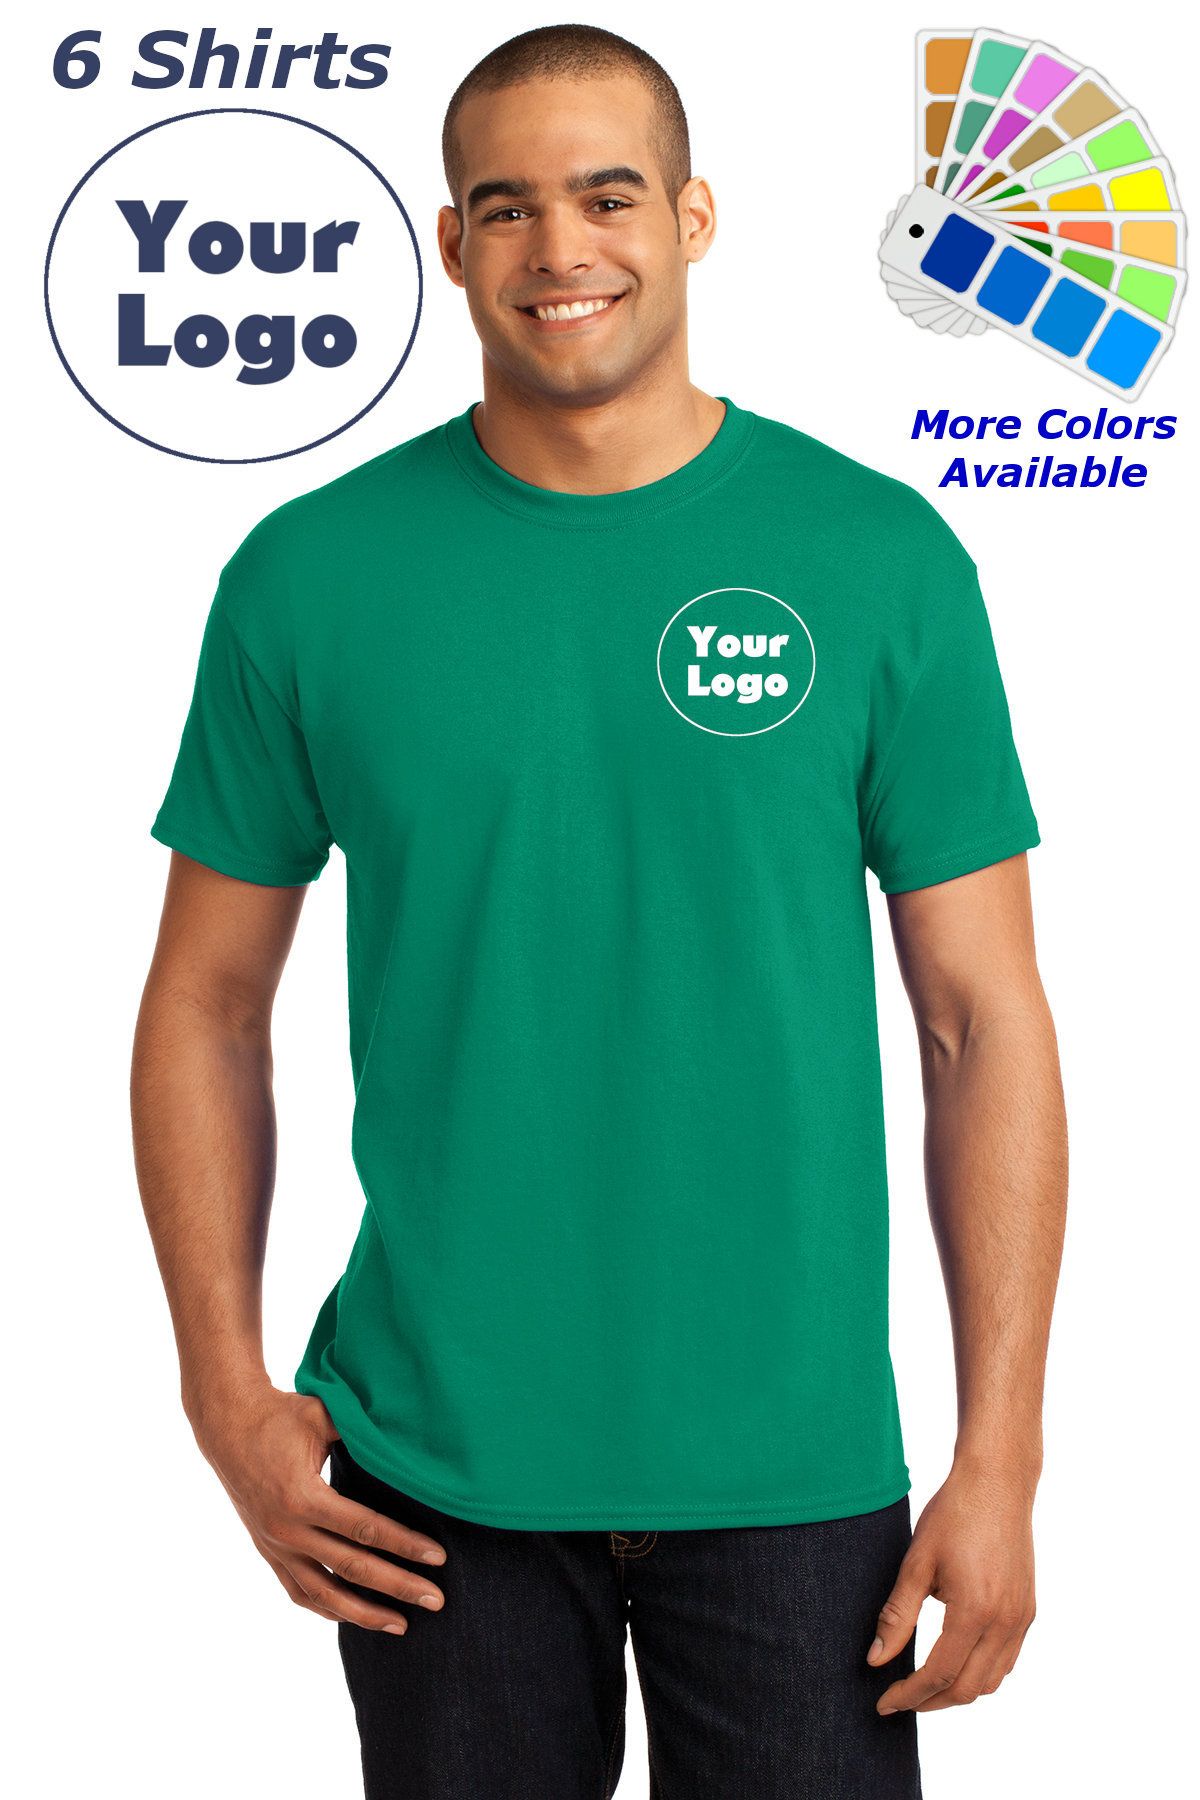 business shirts with logo ideas 1